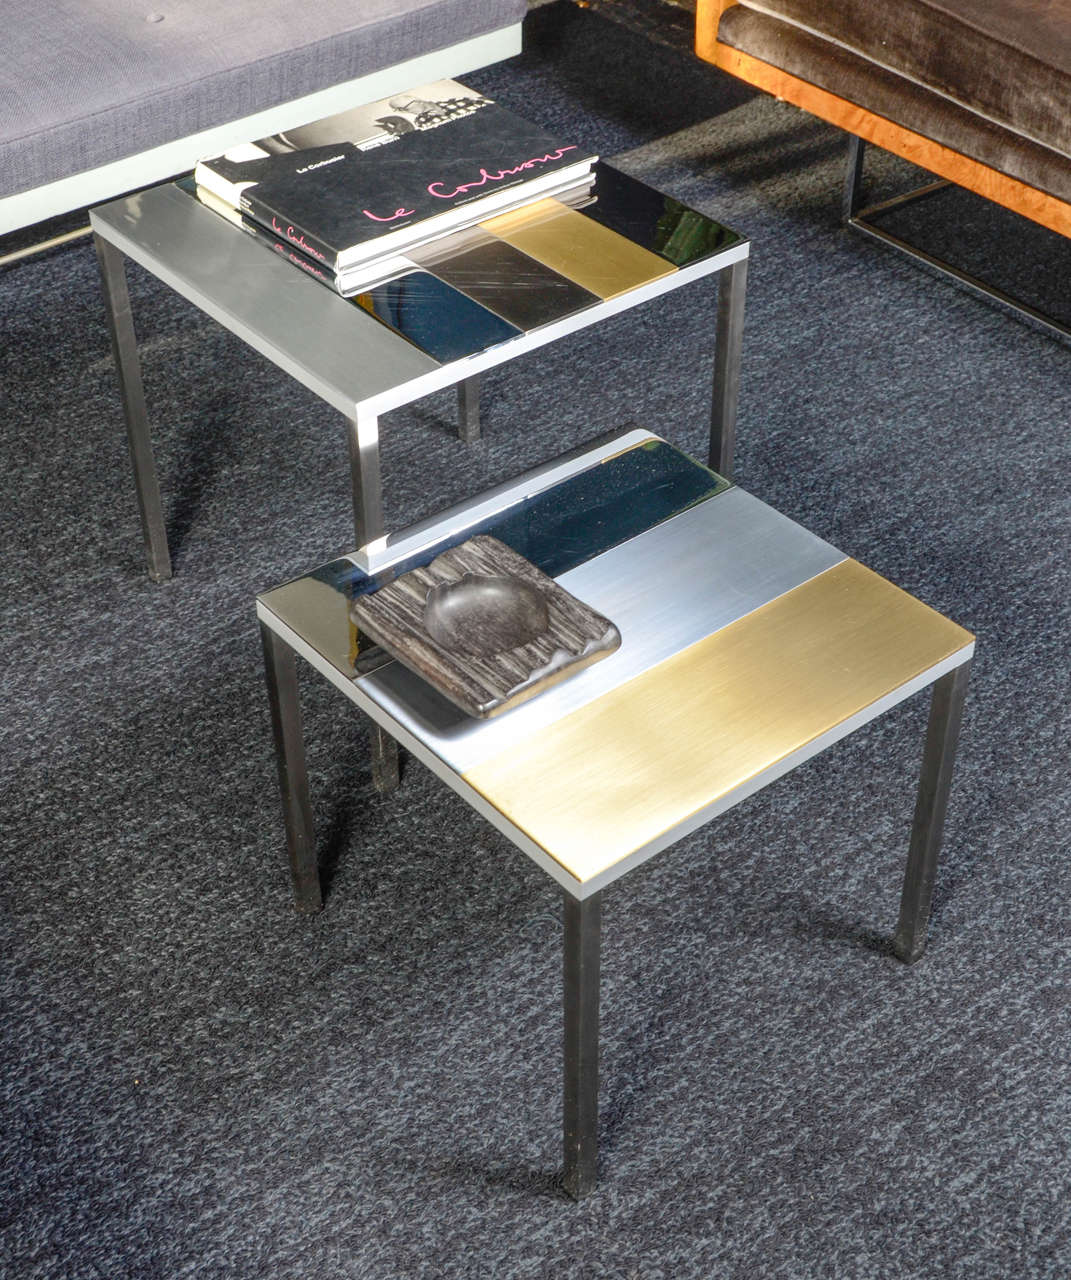 Stainless Steel Pair of Nested Tables from the Florence Lopez Collection by Artist Thomas Lemut For Sale